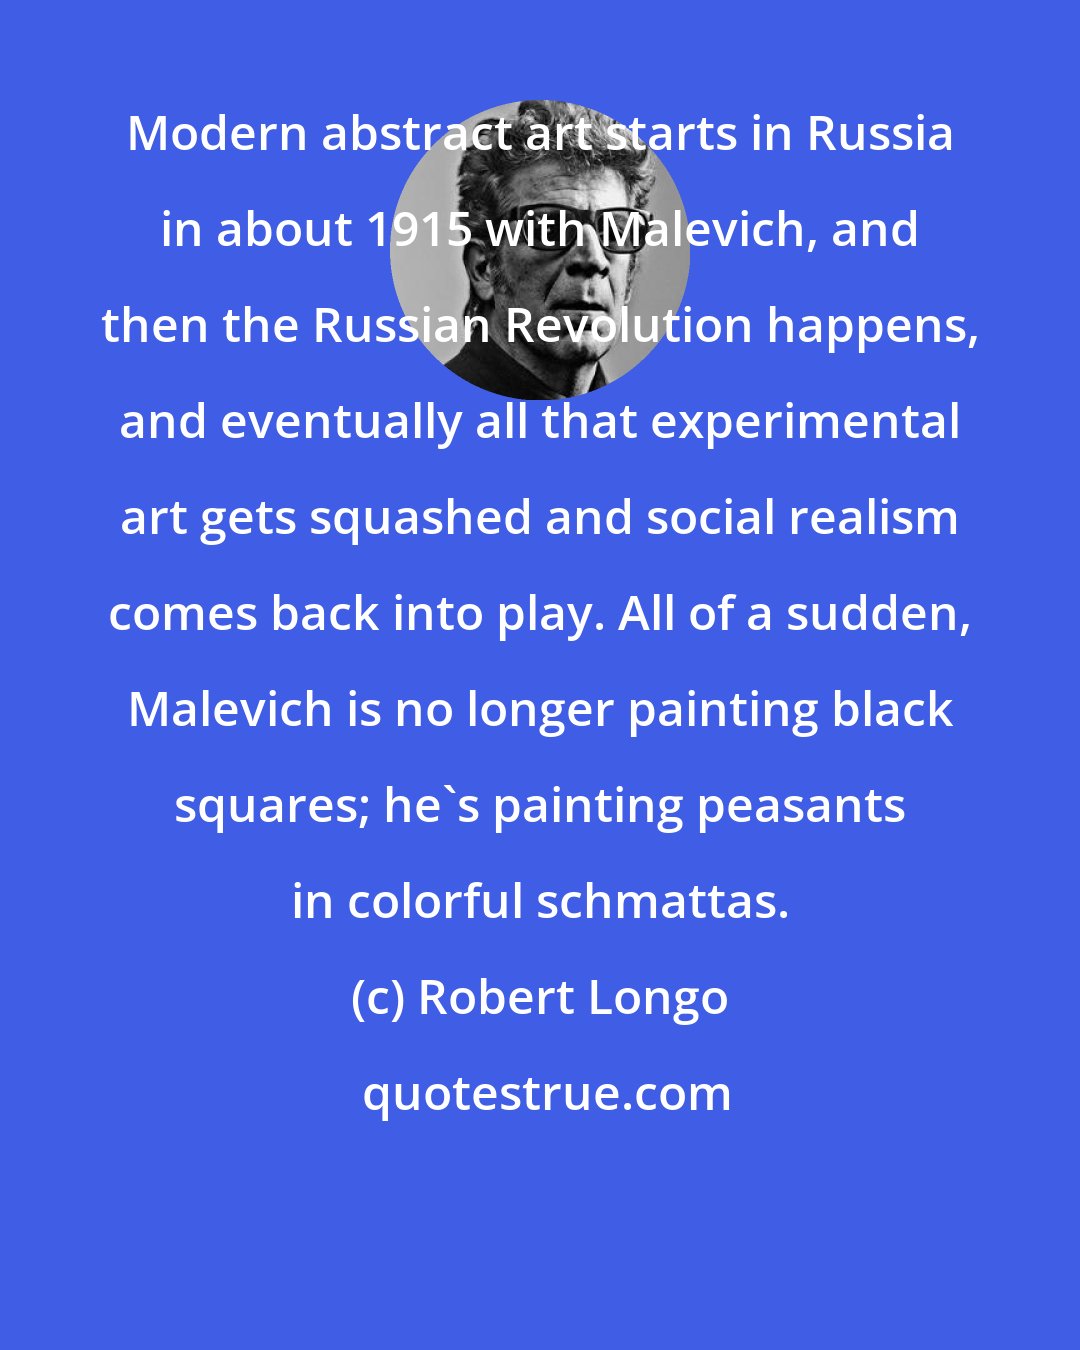 Robert Longo: Modern abstract art starts in Russia in about 1915 with Malevich, and then the Russian Revolution happens, and eventually all that experimental art gets squashed and social realism comes back into play. All of a sudden, Malevich is no longer painting black squares; he's painting peasants in colorful schmattas.